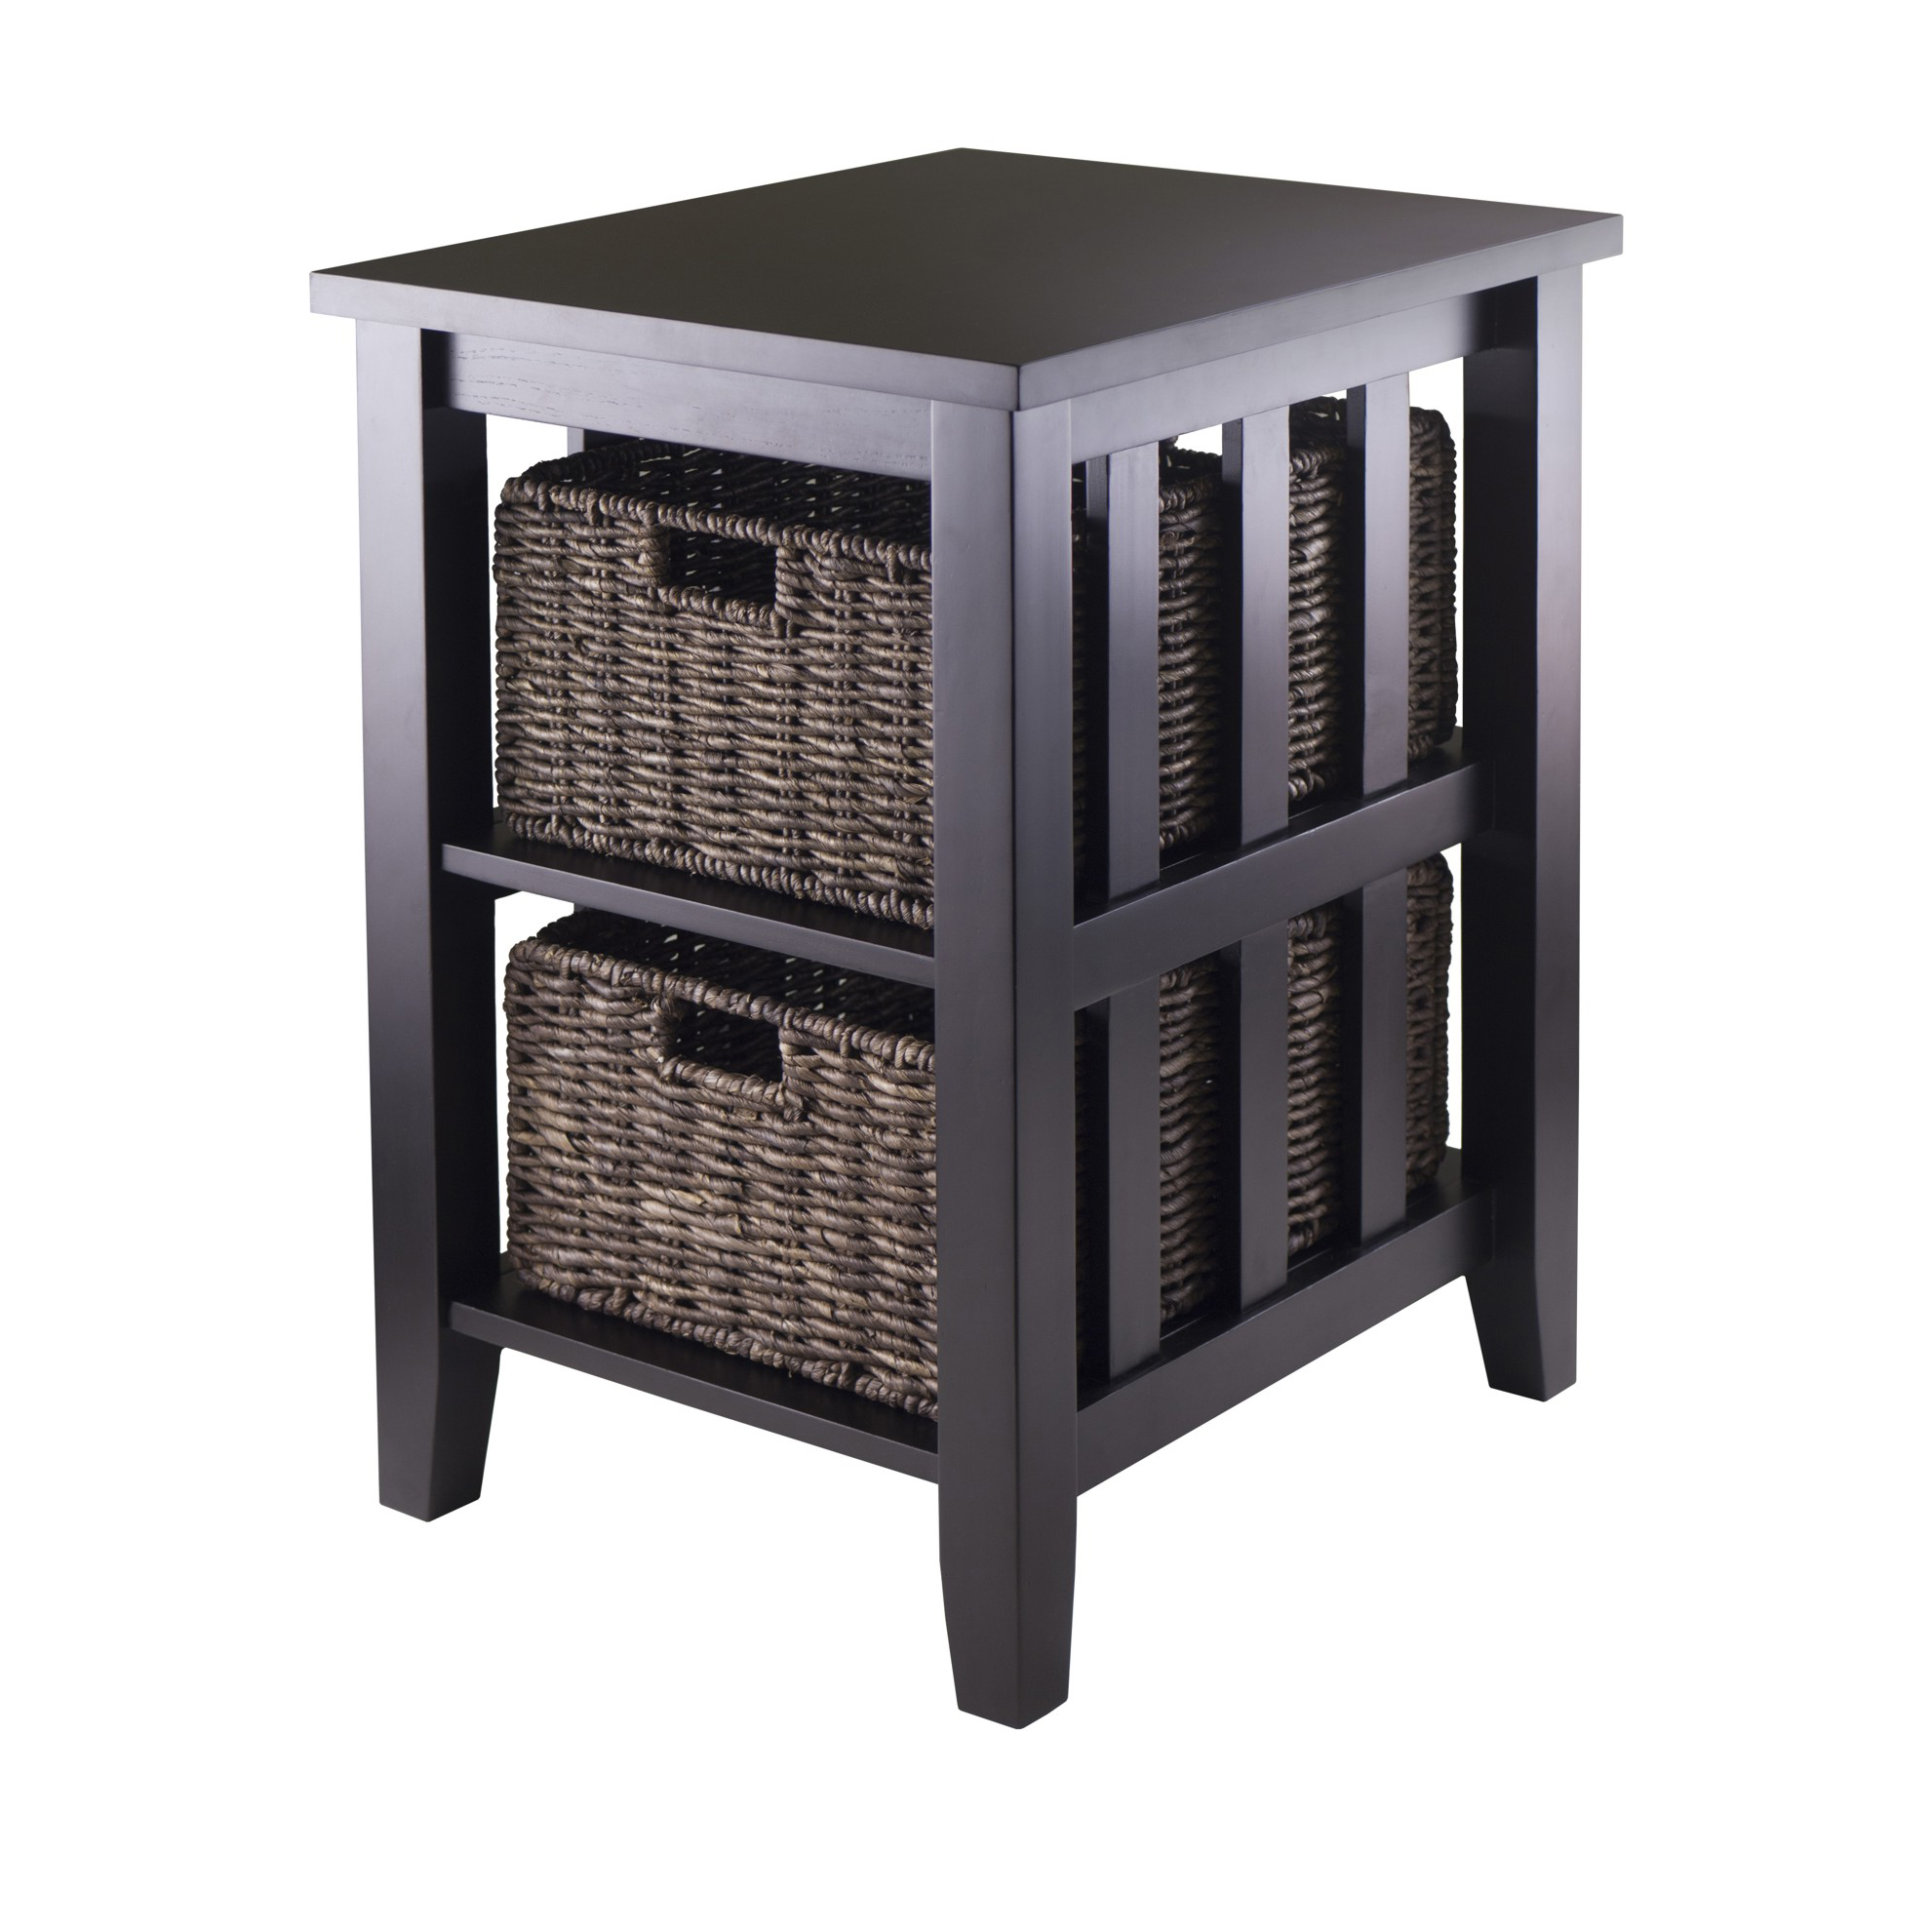 Winsome Wood Morris Accent Table, 2 Foldable Chocolate Corn Husk Baskets, Espresso Finish - image 1 of 5